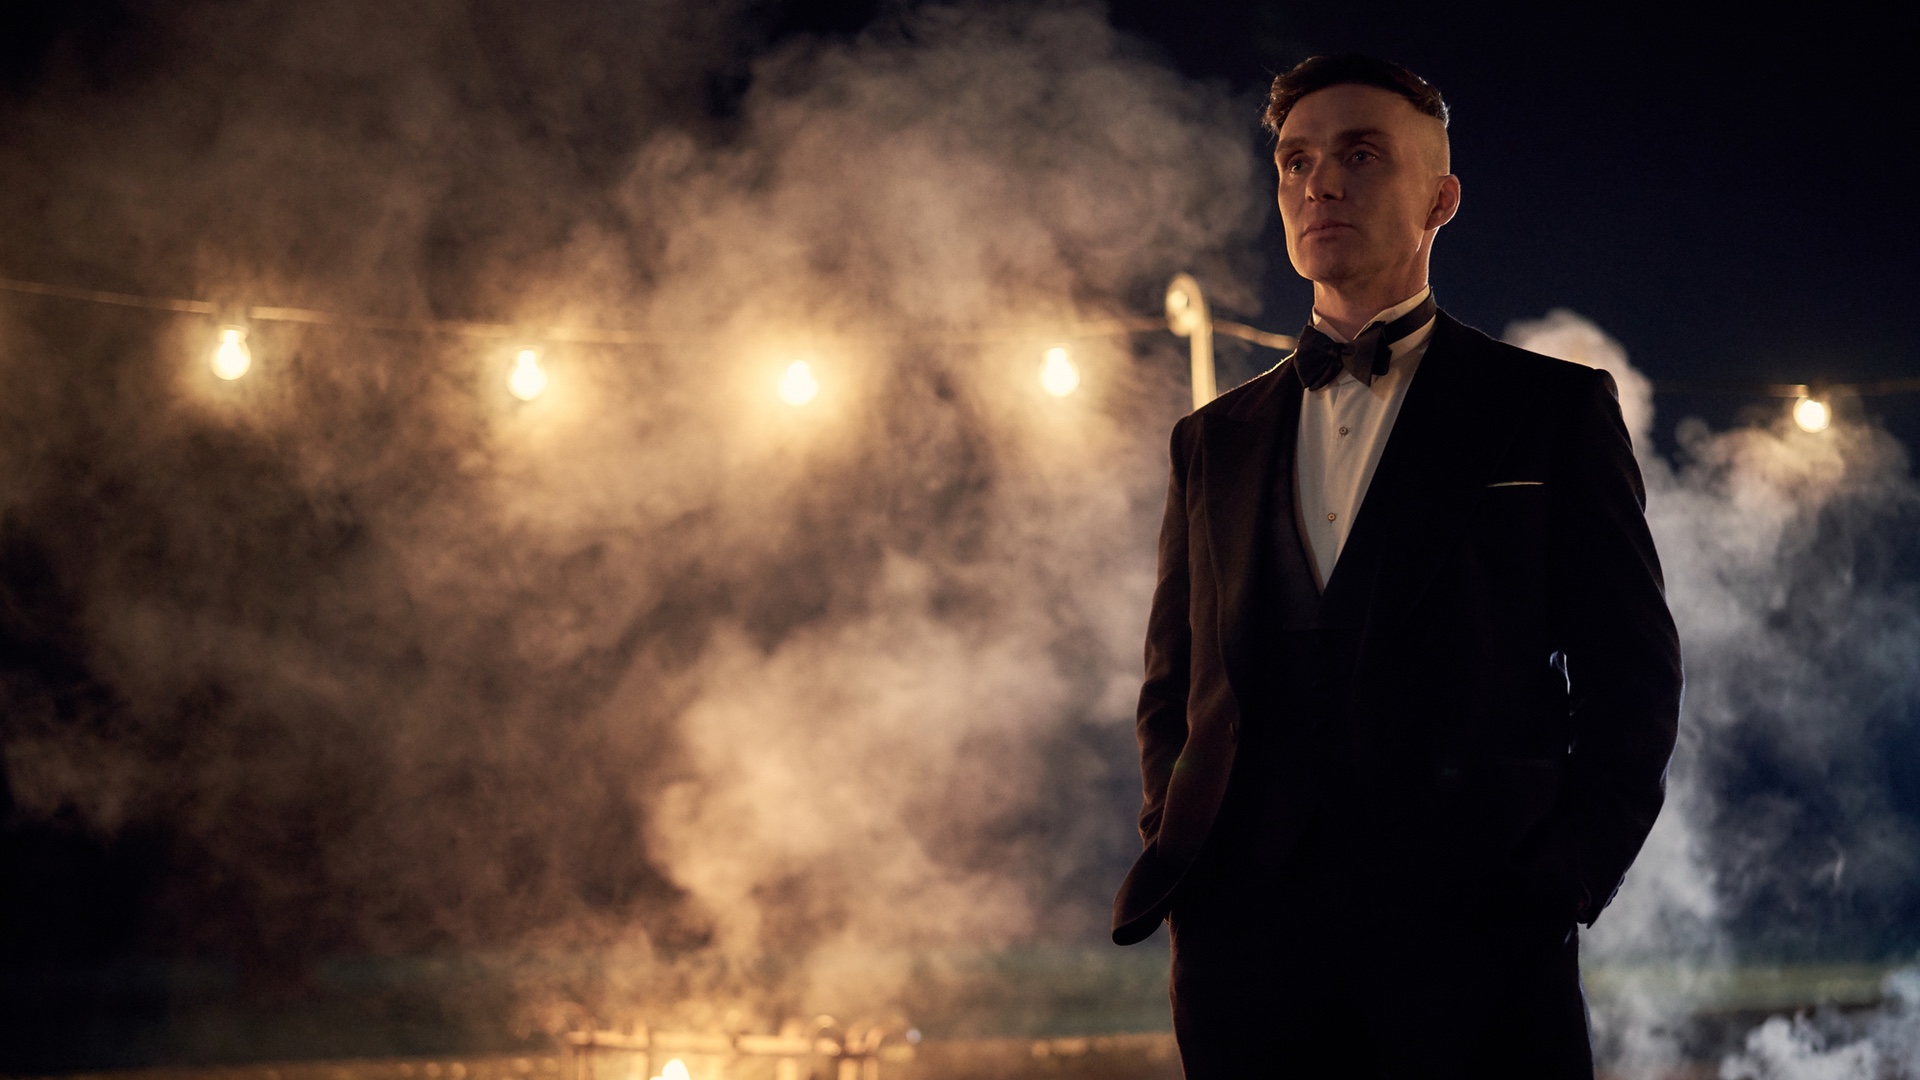 The Long Awaited Fifth Season of Netflixs PEAKY BLINDERS Gets a 1920x1080